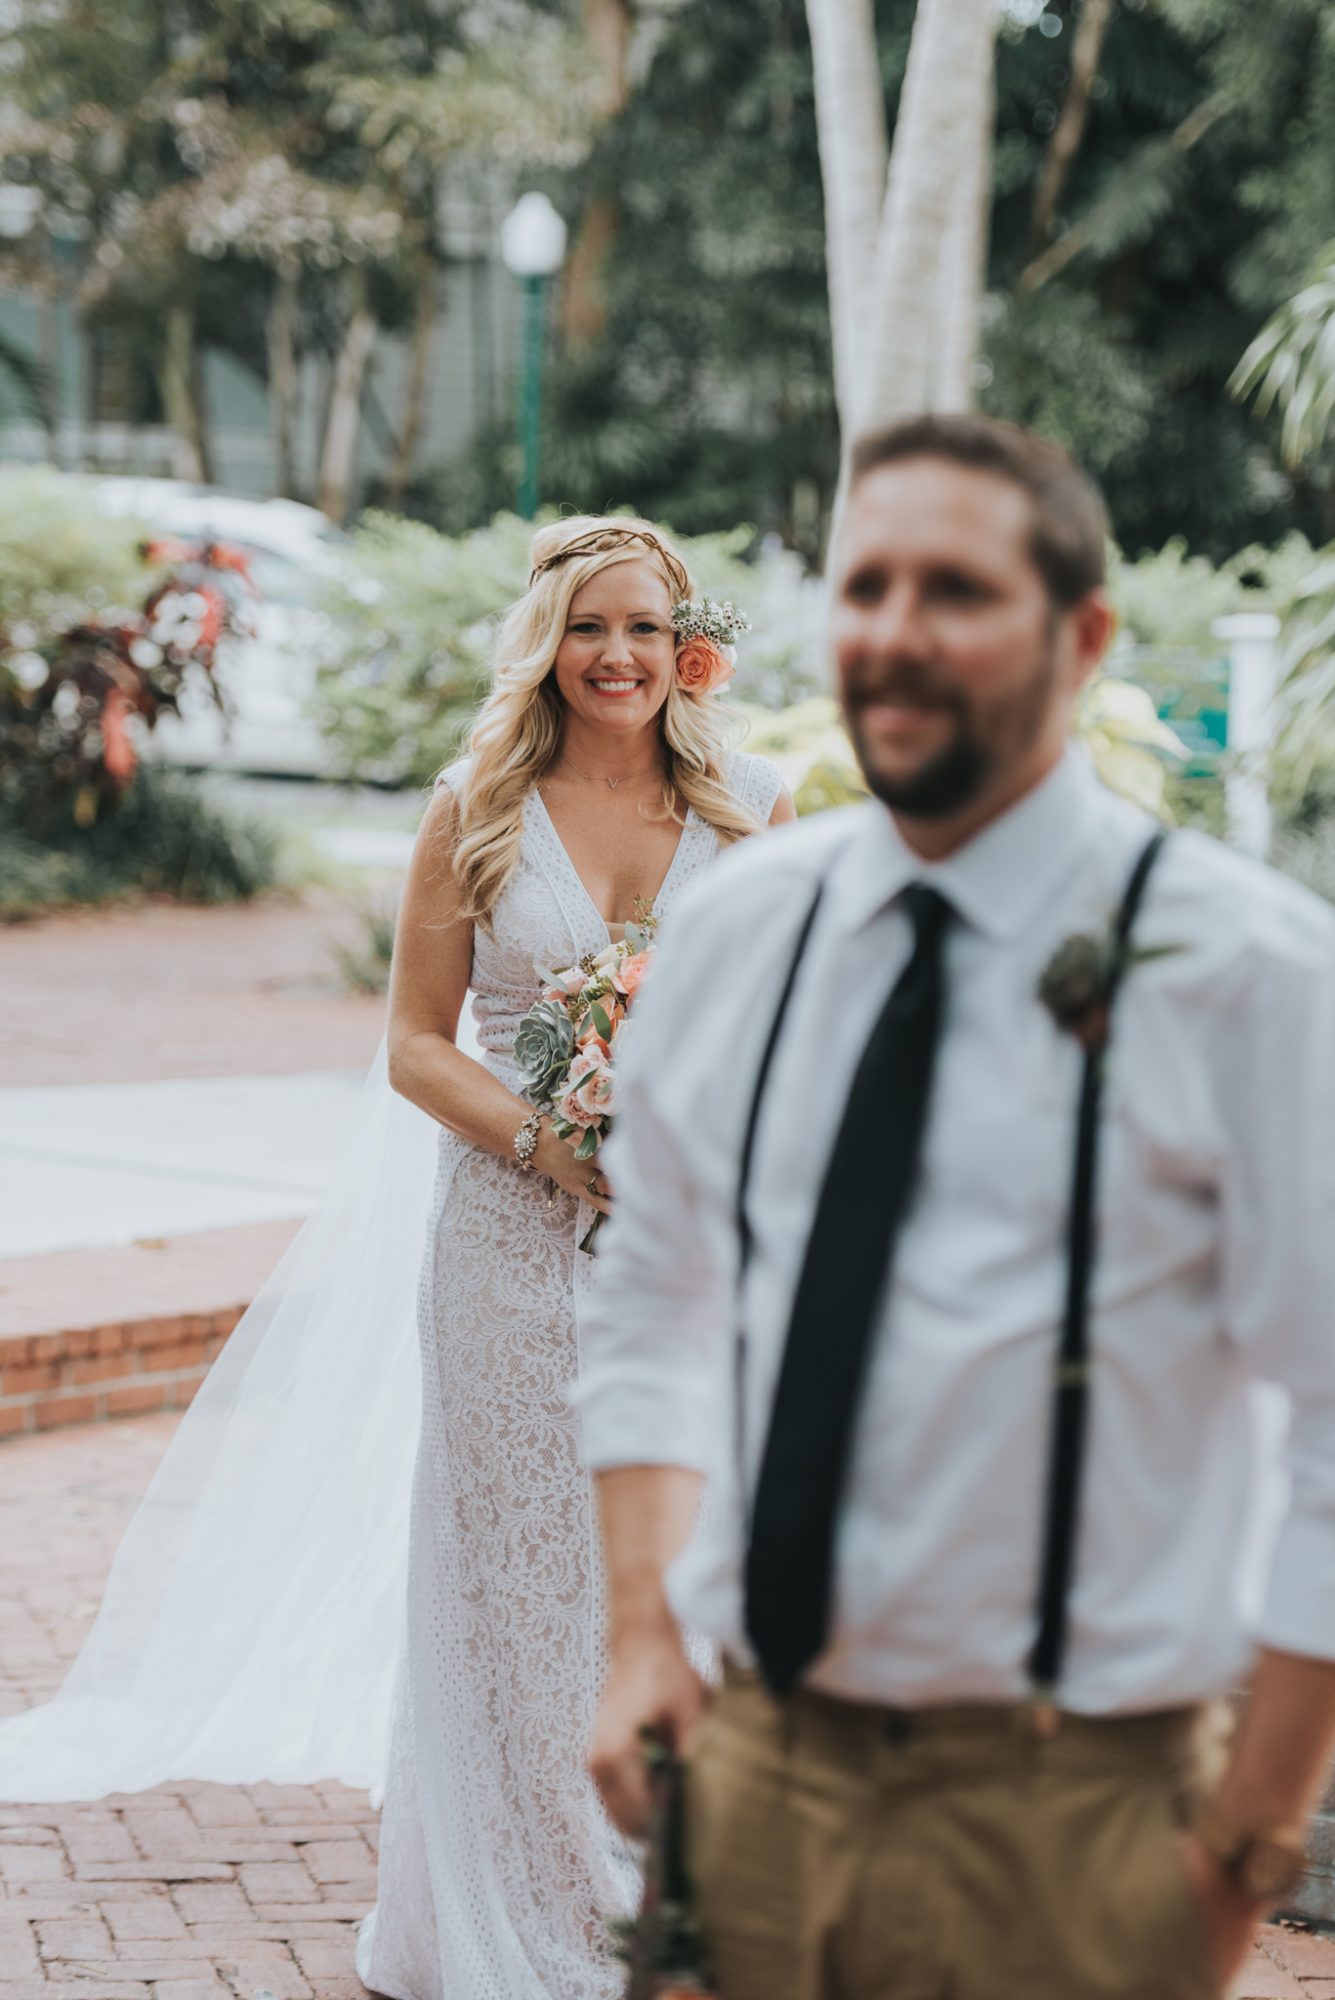 Amy and Teddy's Key West wedding captured by an experienced photographer at Fort Zachary and Truman Little White House while the couple walks down a brick walkway.